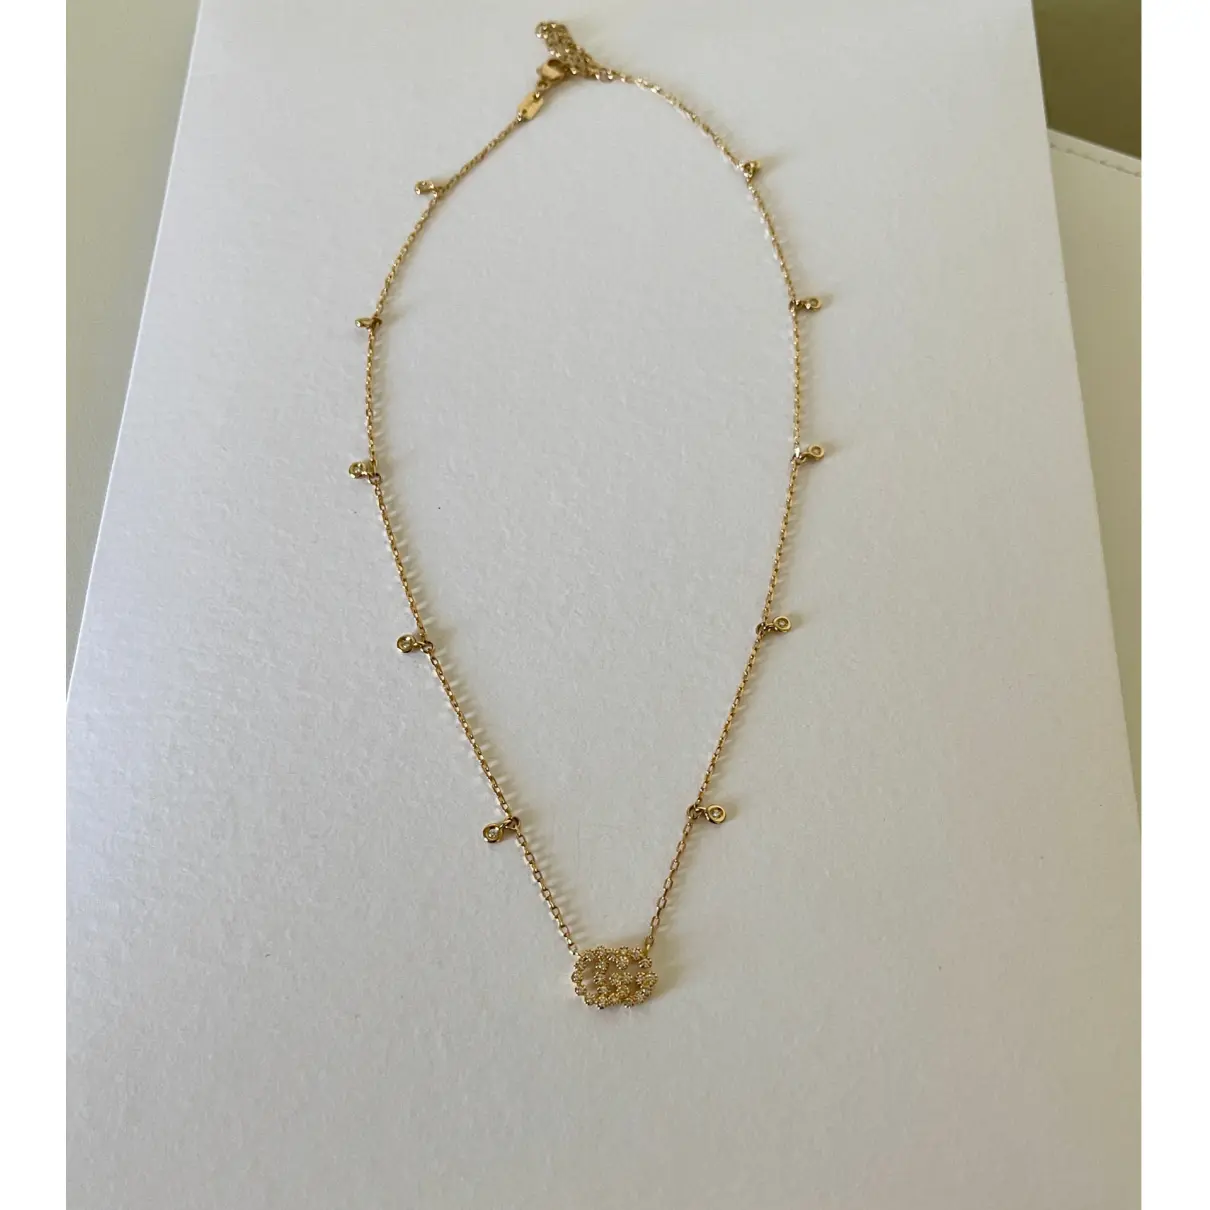 Buy Gucci Yellow gold necklace online